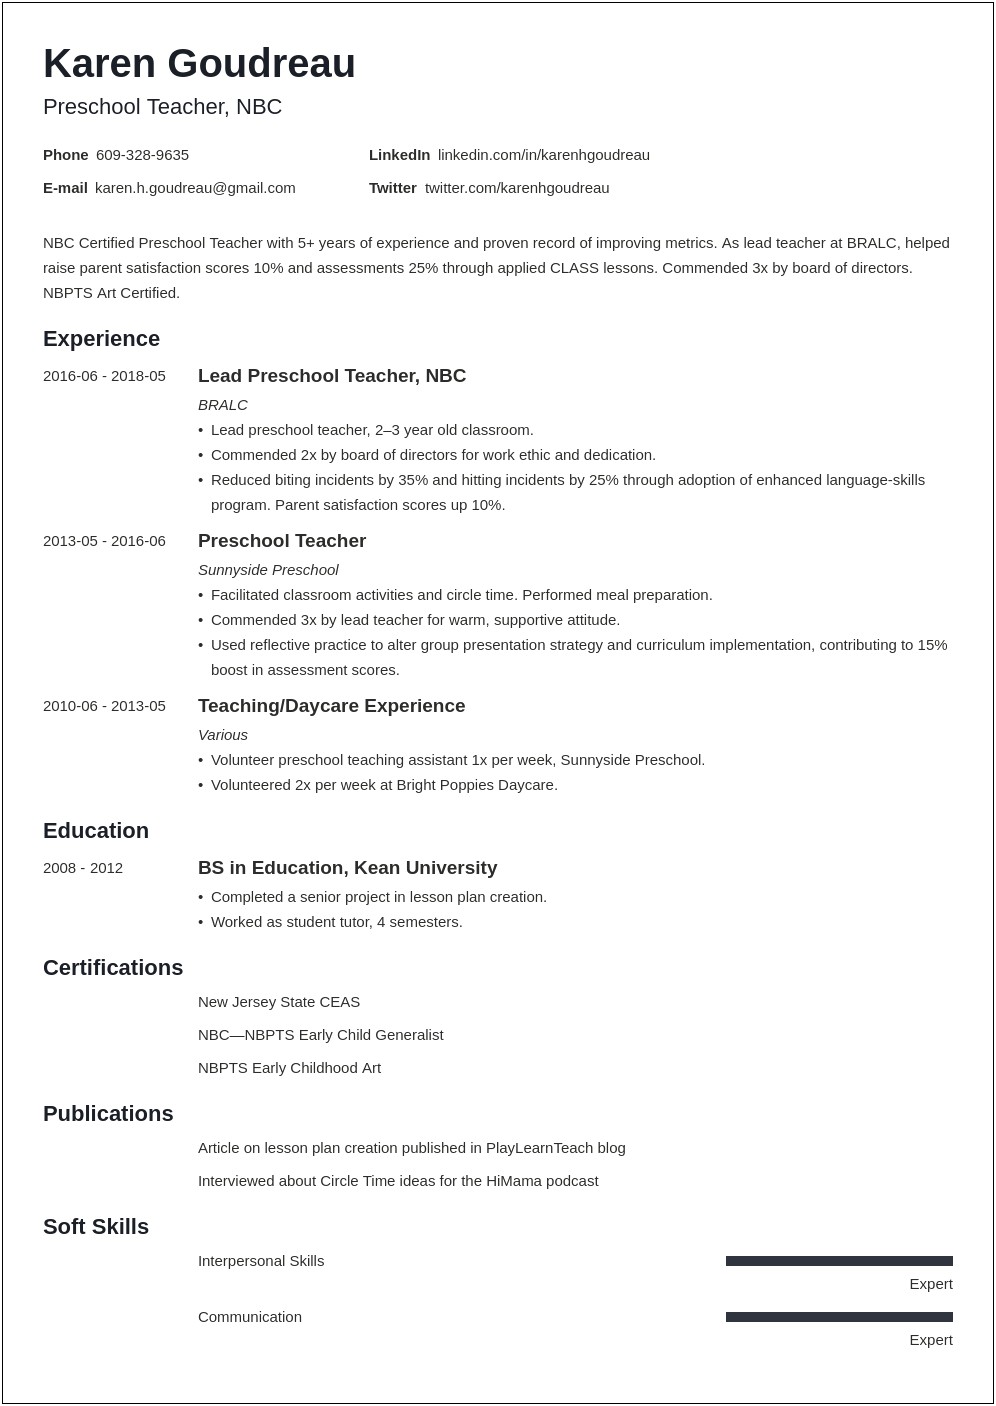 Resume Sample For Childcare Assistant